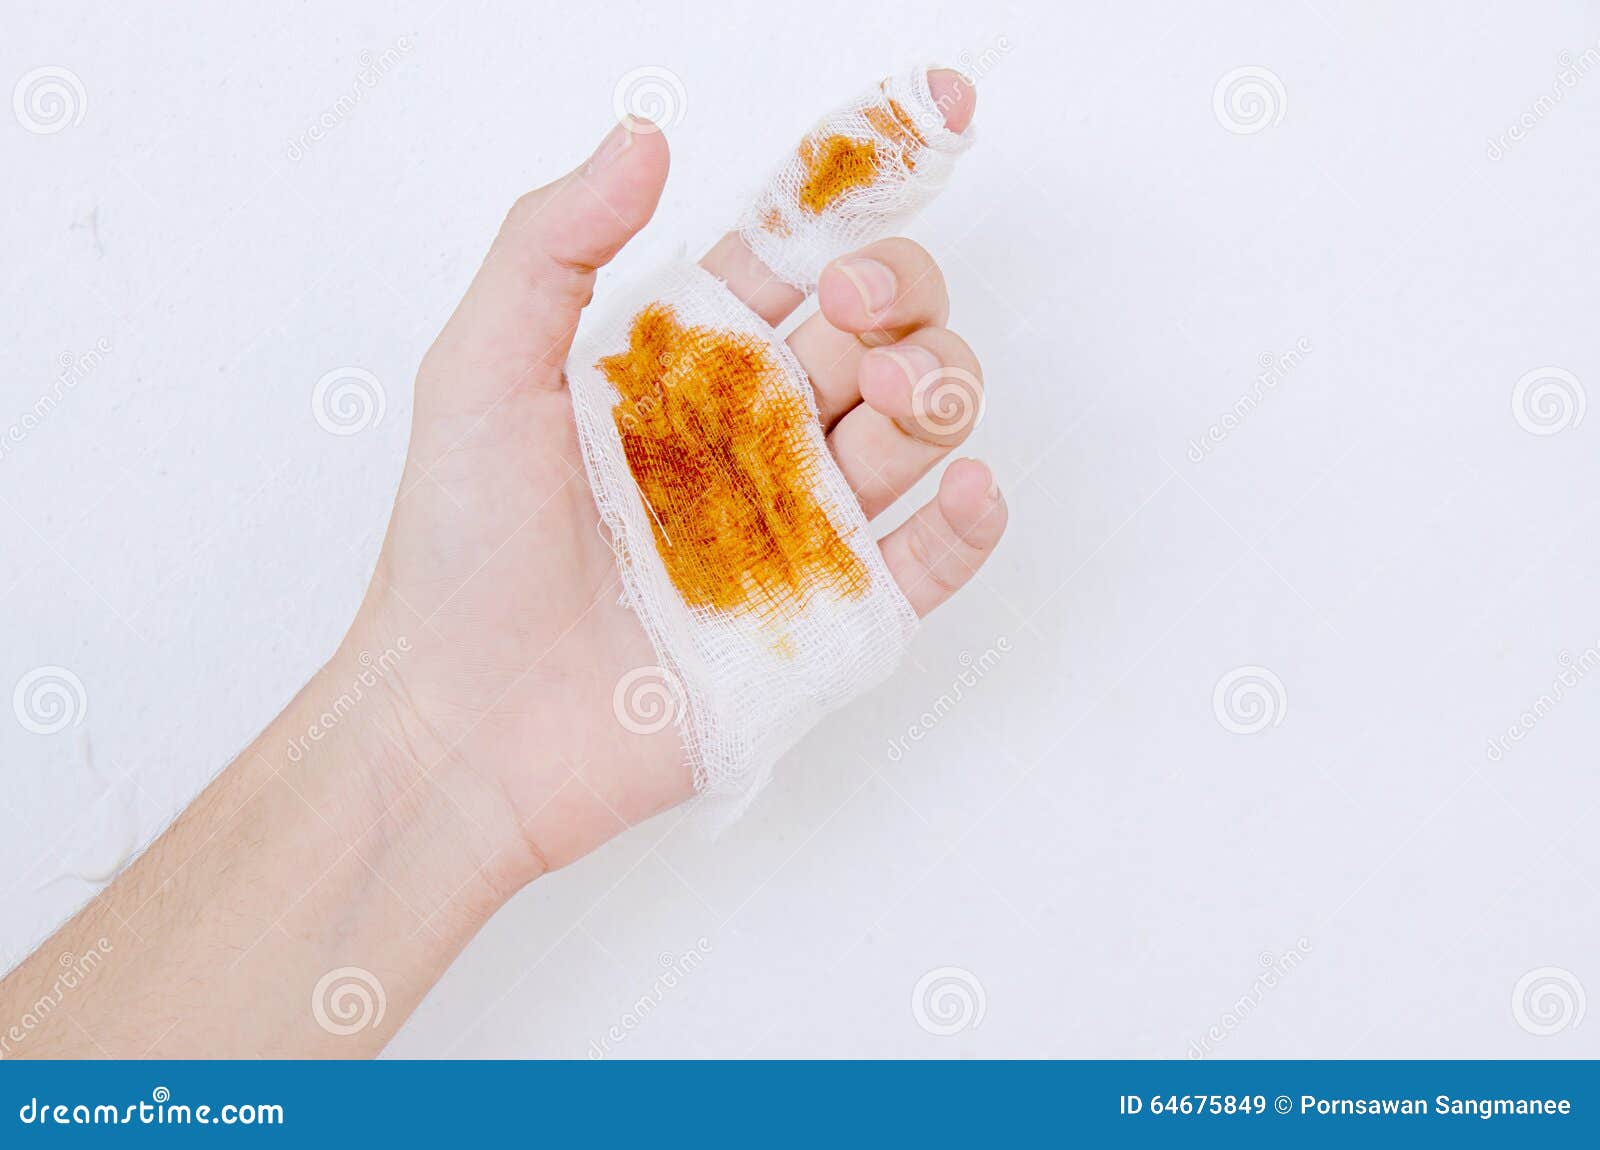 1 556 Hand Blood Bandage Photos Free Royalty Free Stock Photos From Dreamstime